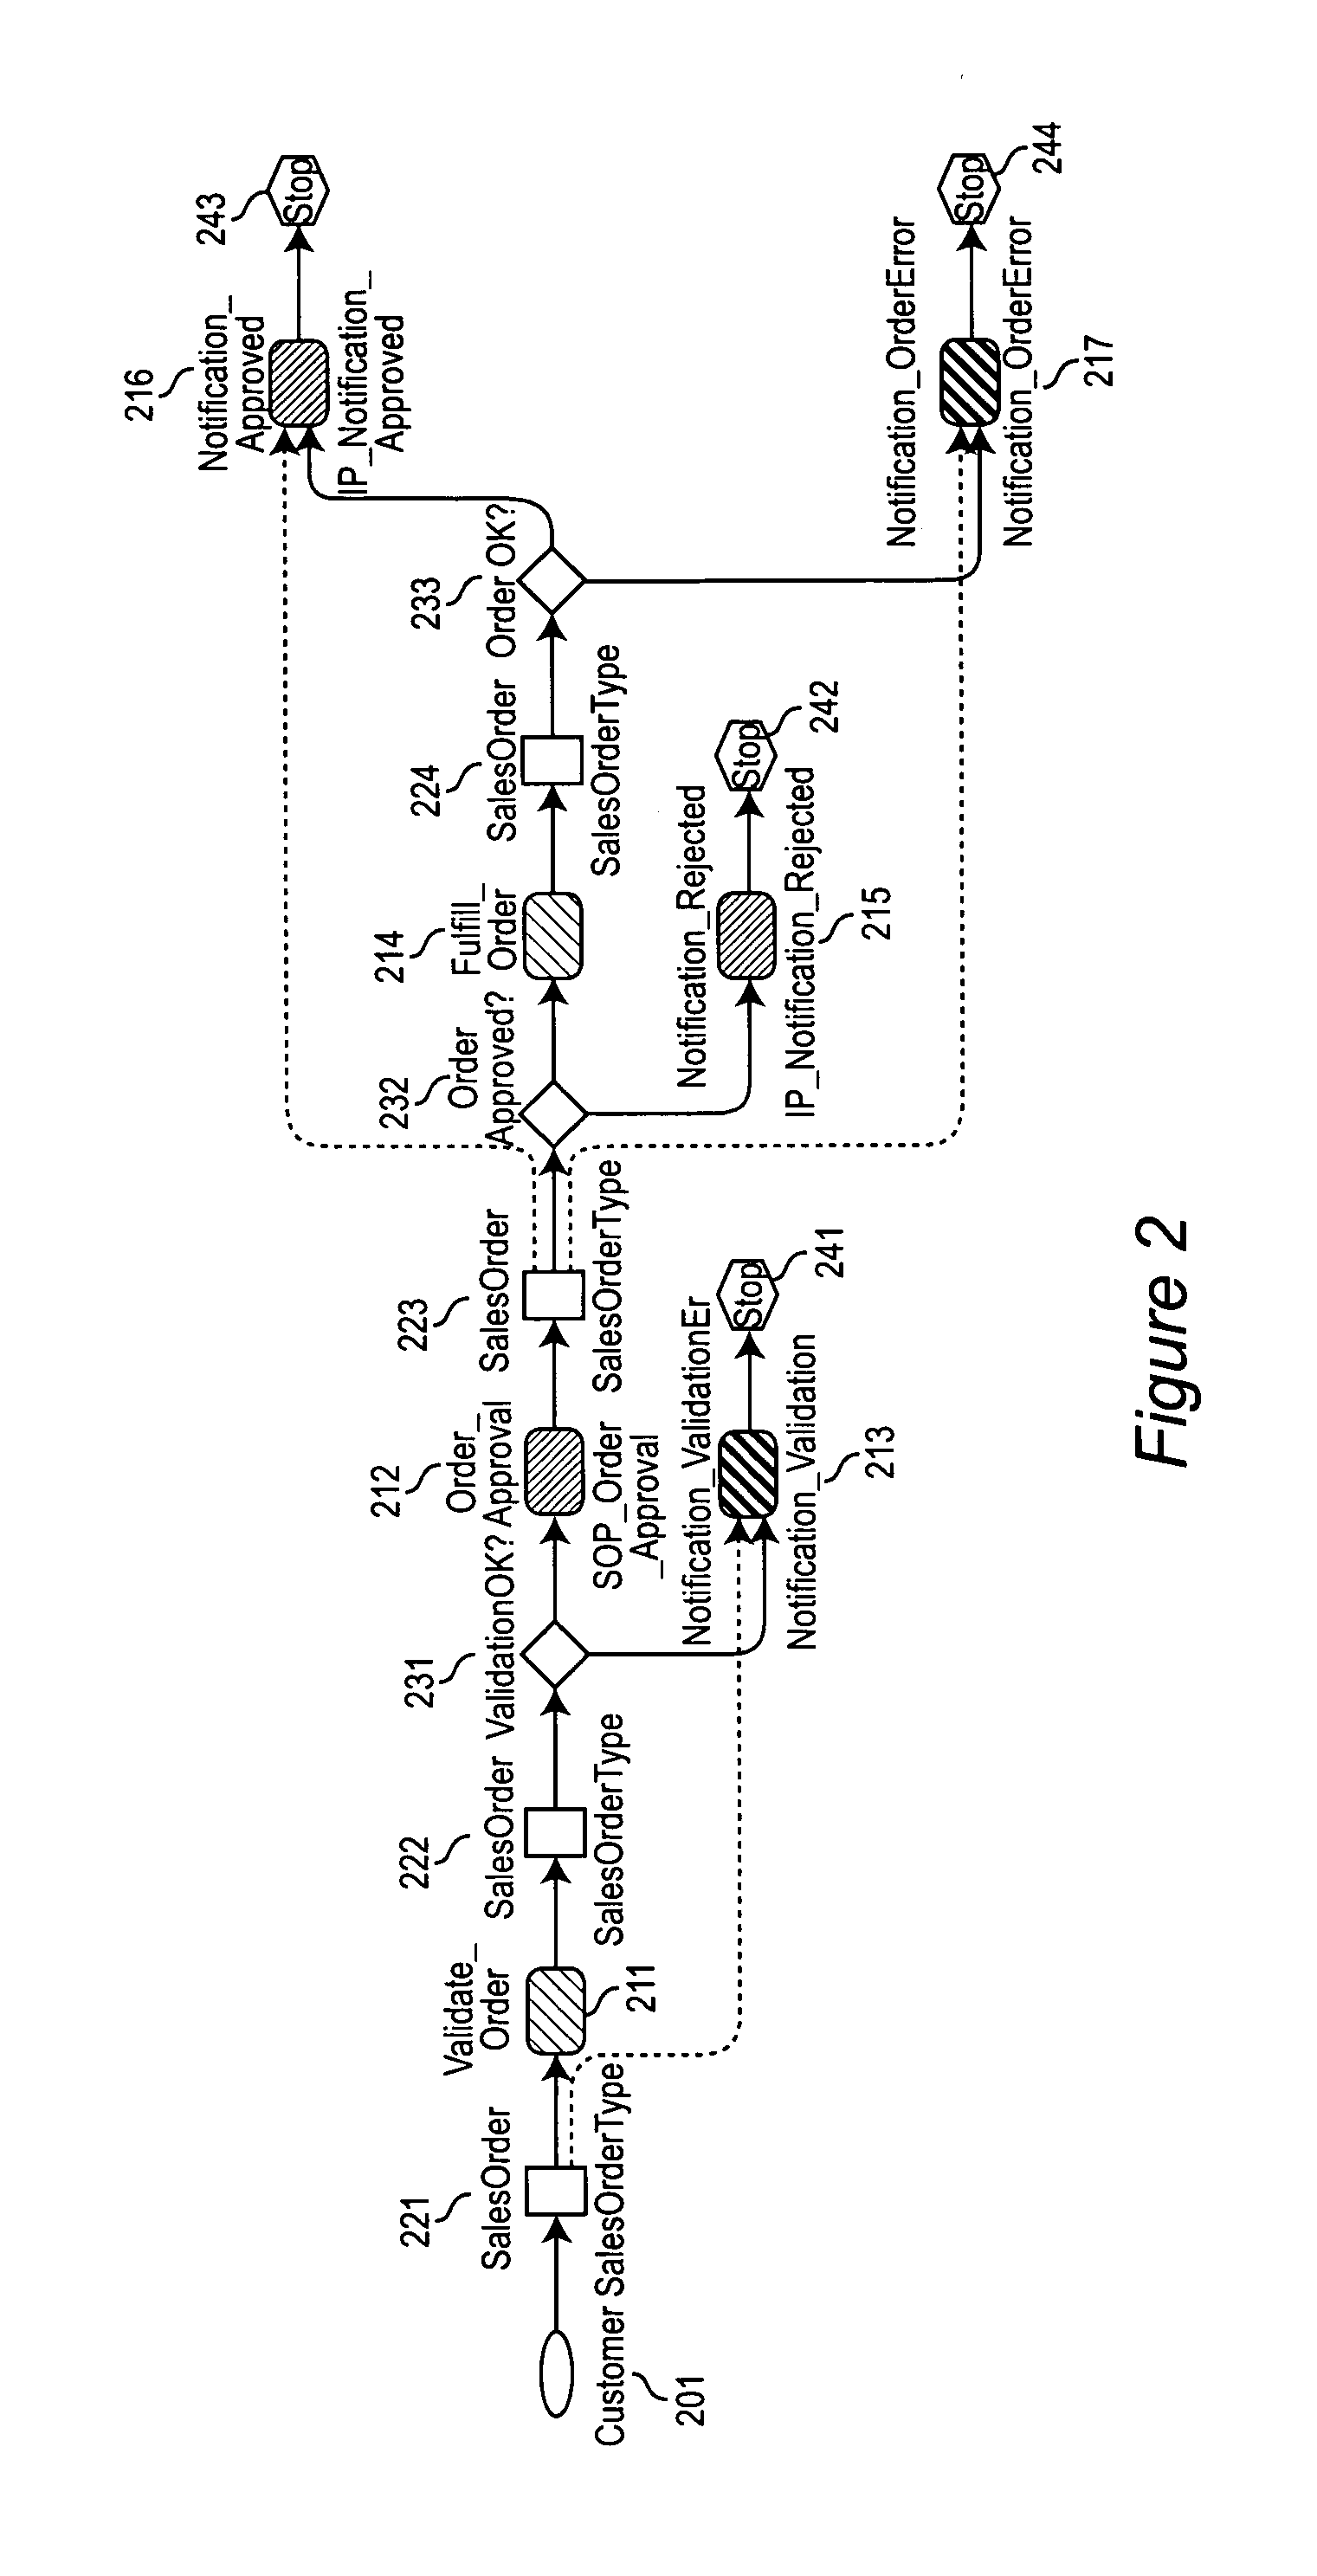 System and method for analyzing and managing business performance